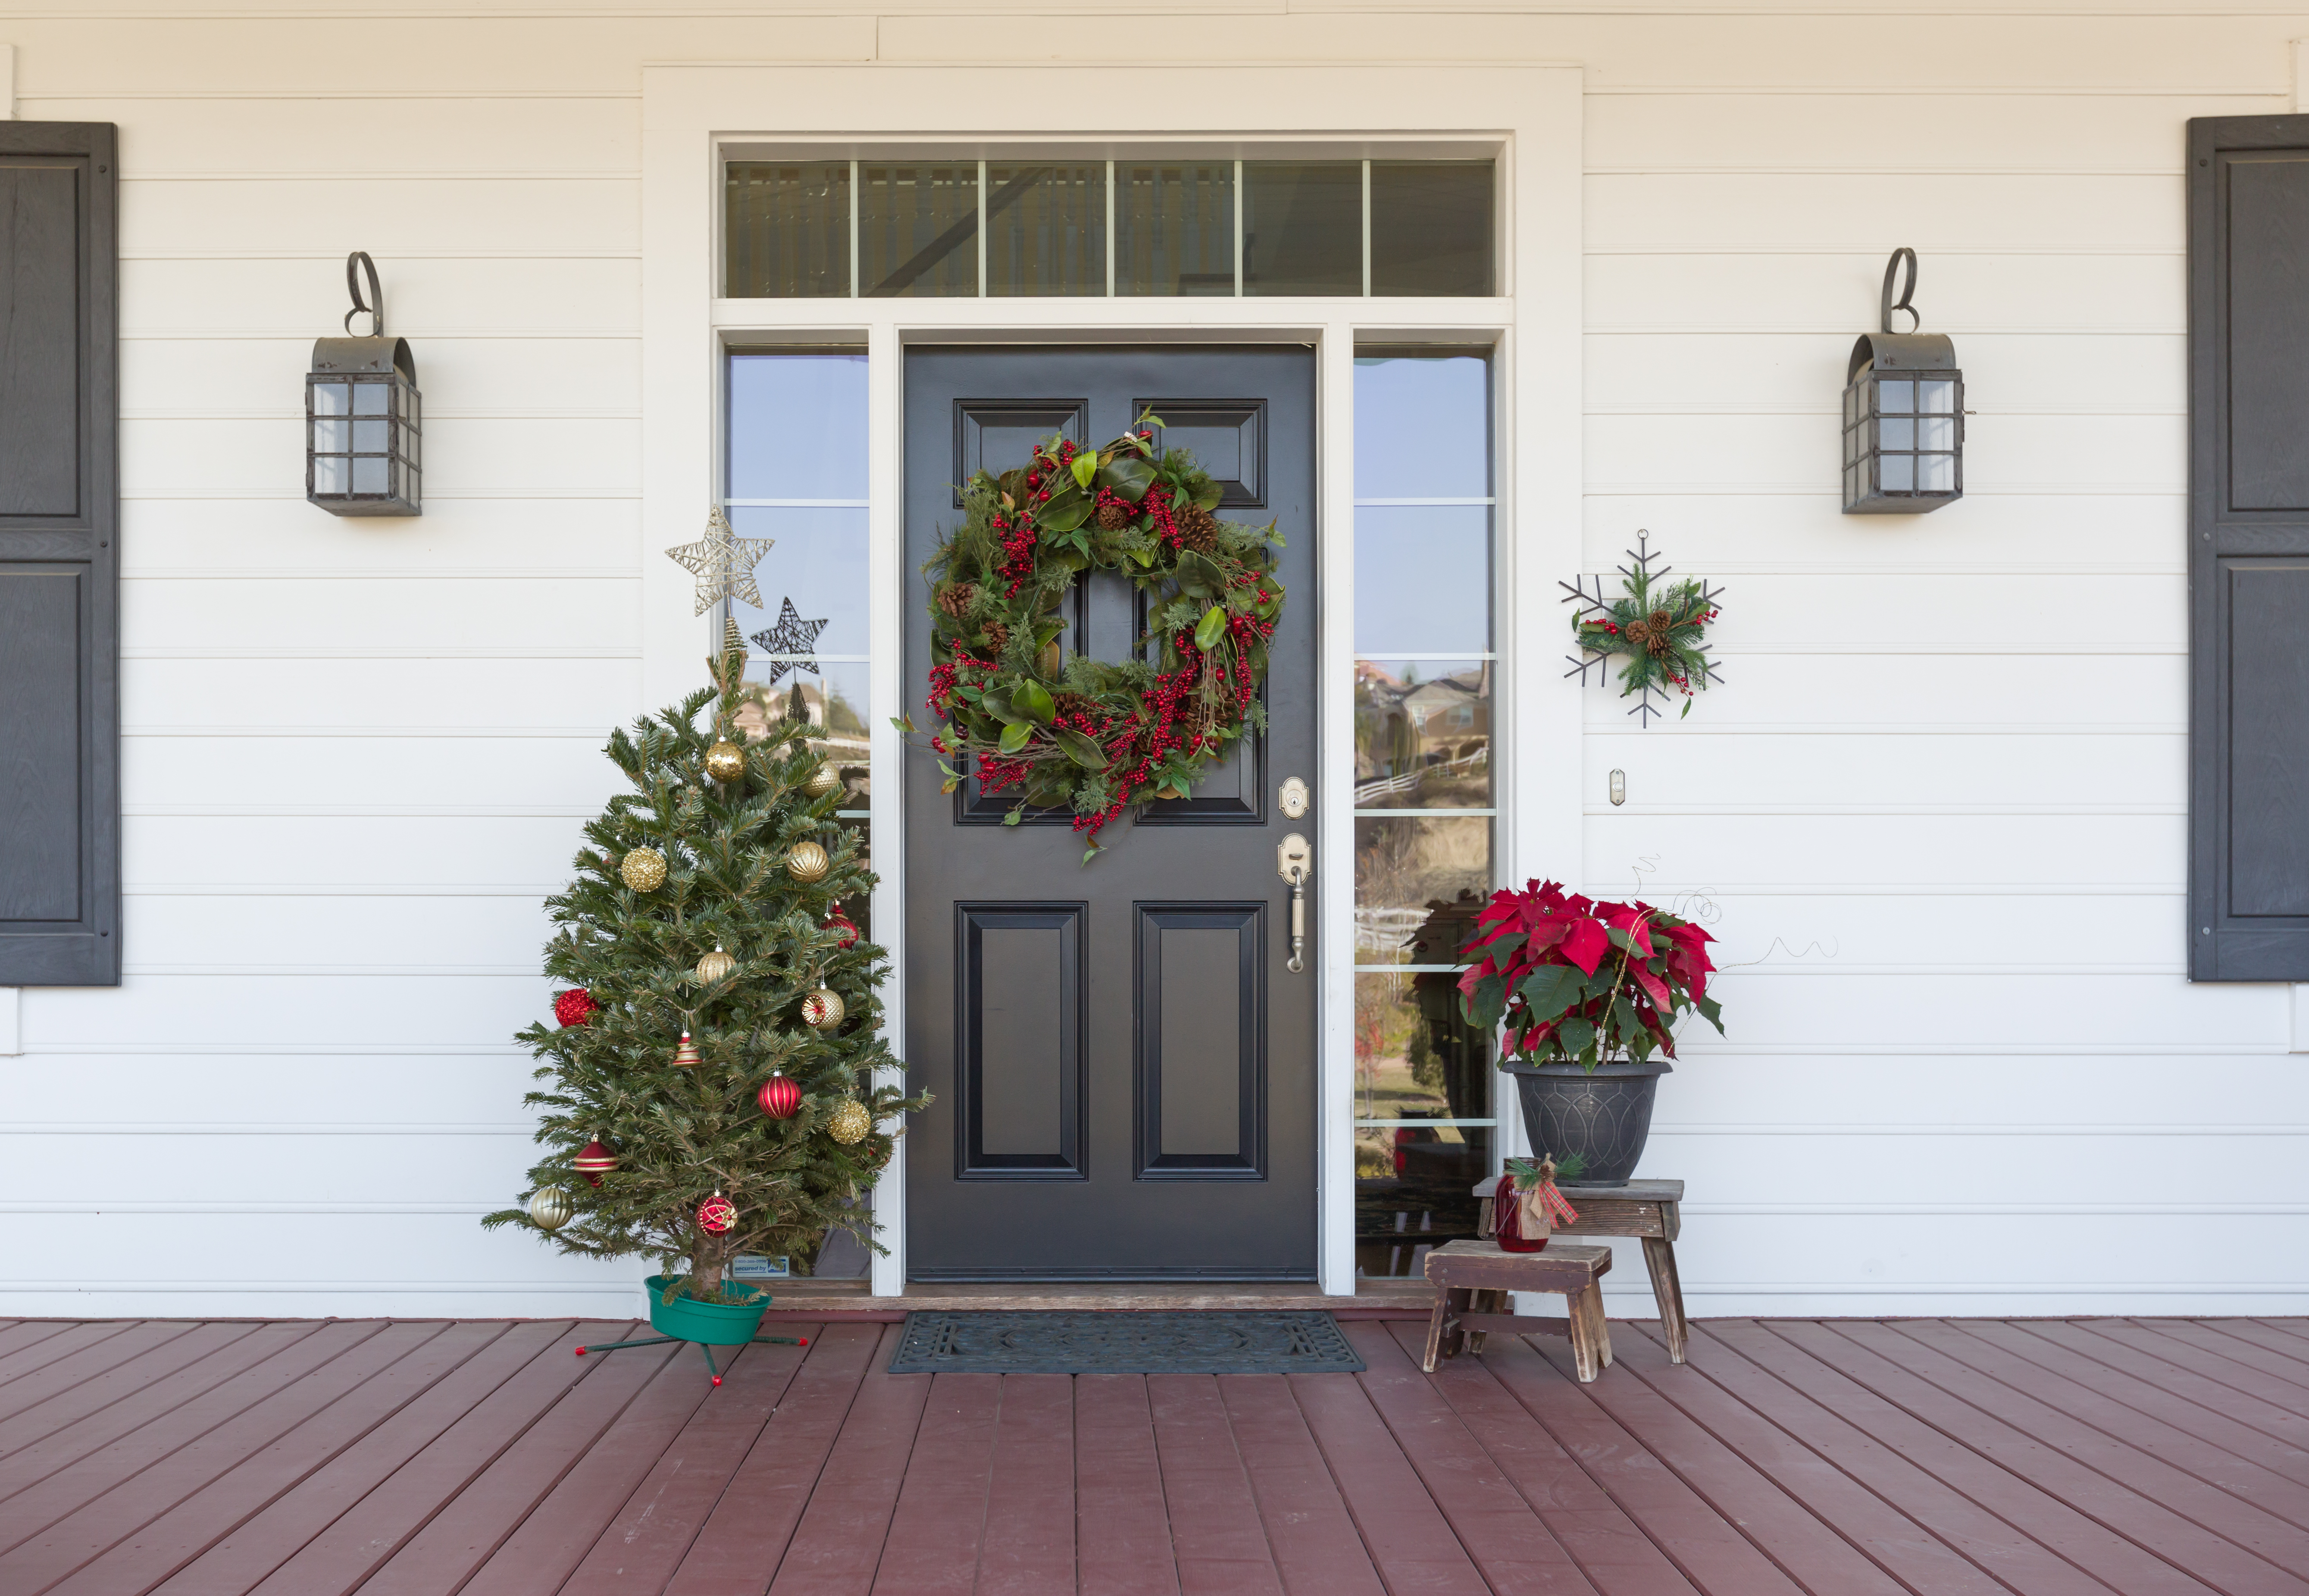 15 Cute & Easily Reversible Apartment Door Decorating Ideas for Christmas